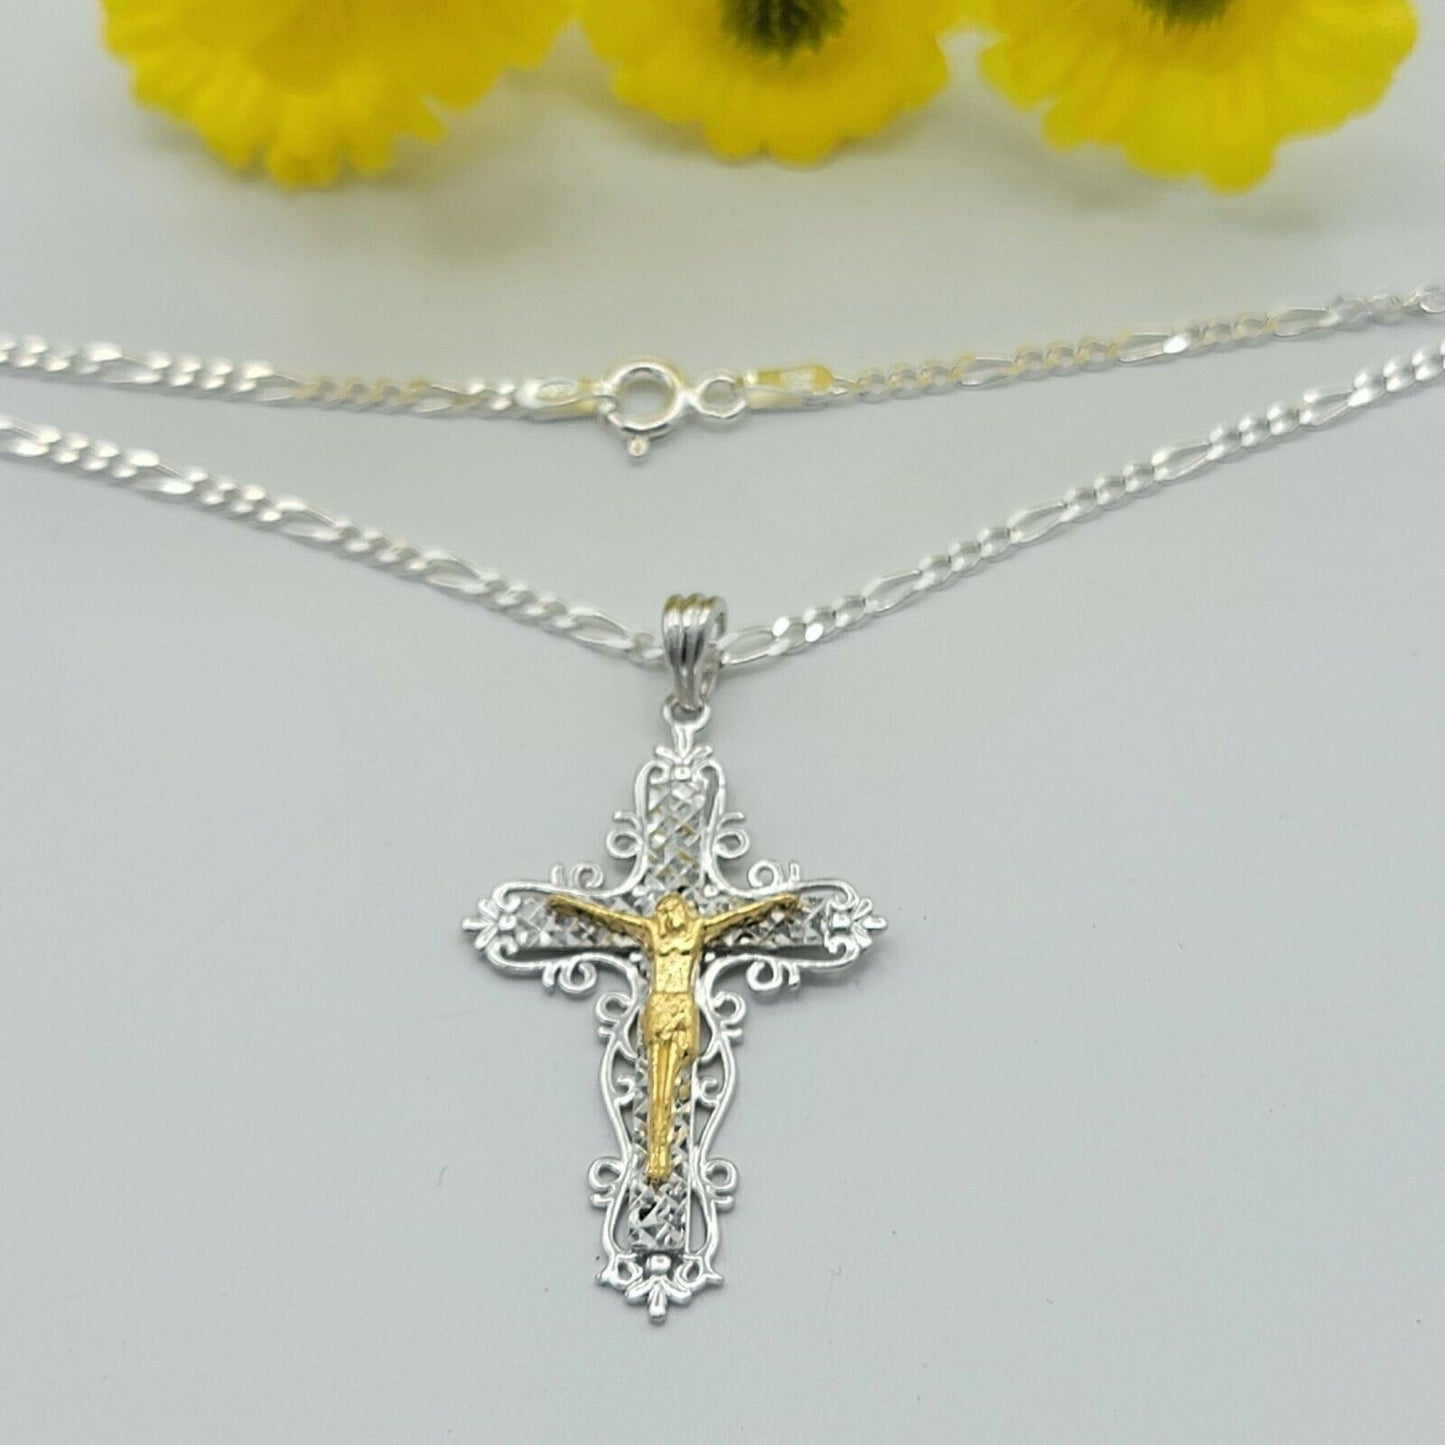 Solid 925 Sterling Silver. Jesus Christ Cross Crucifix 2 Toned Pendant Necklace